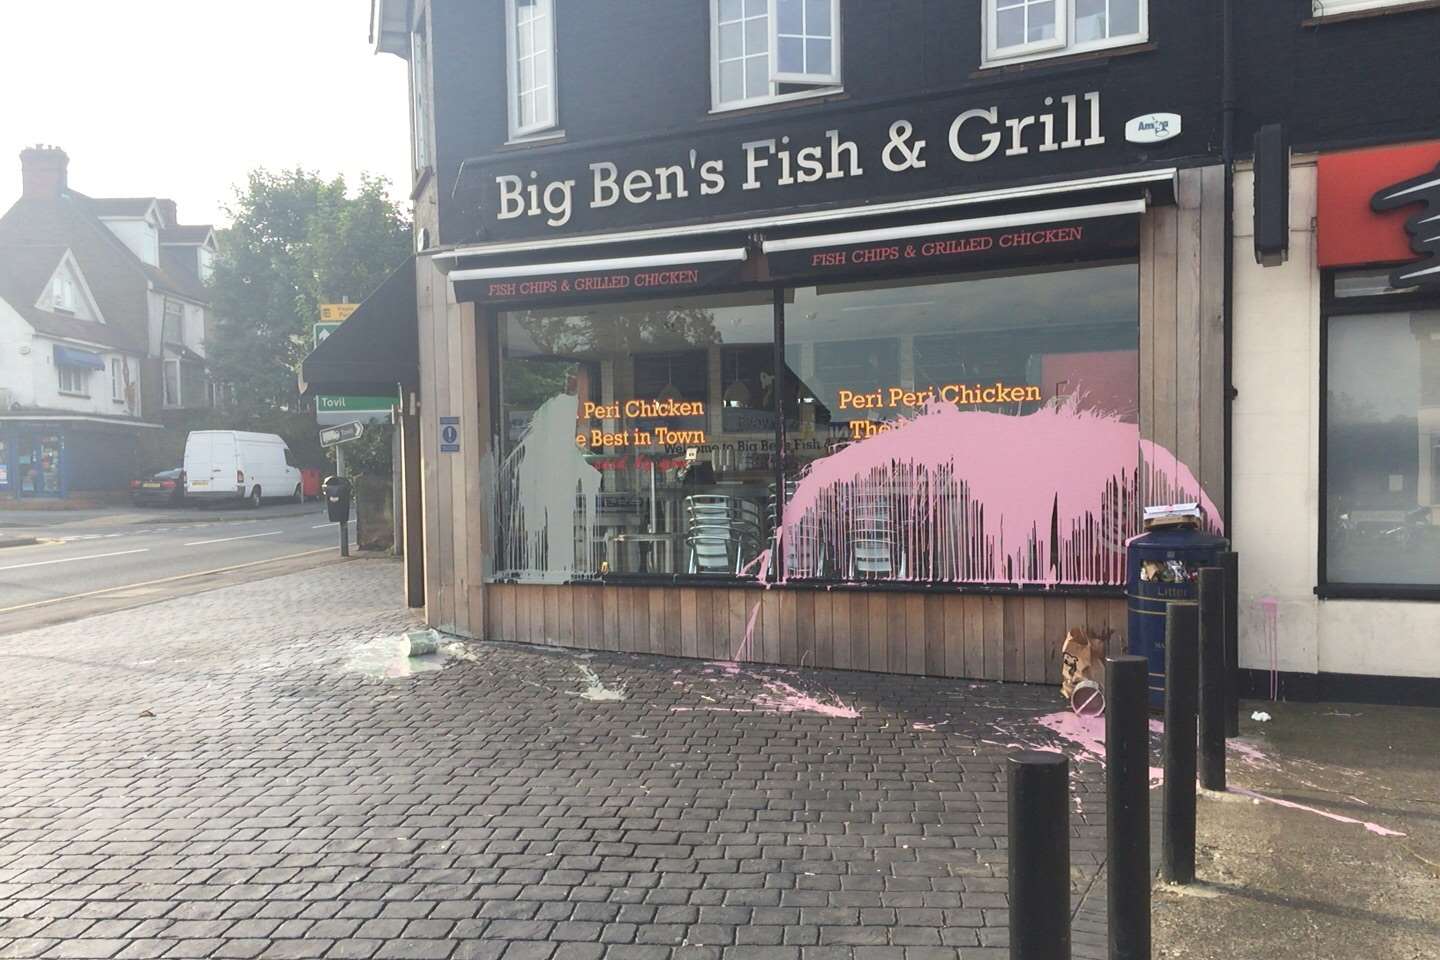 Big Ben's Fish and Grill has been covered in paint